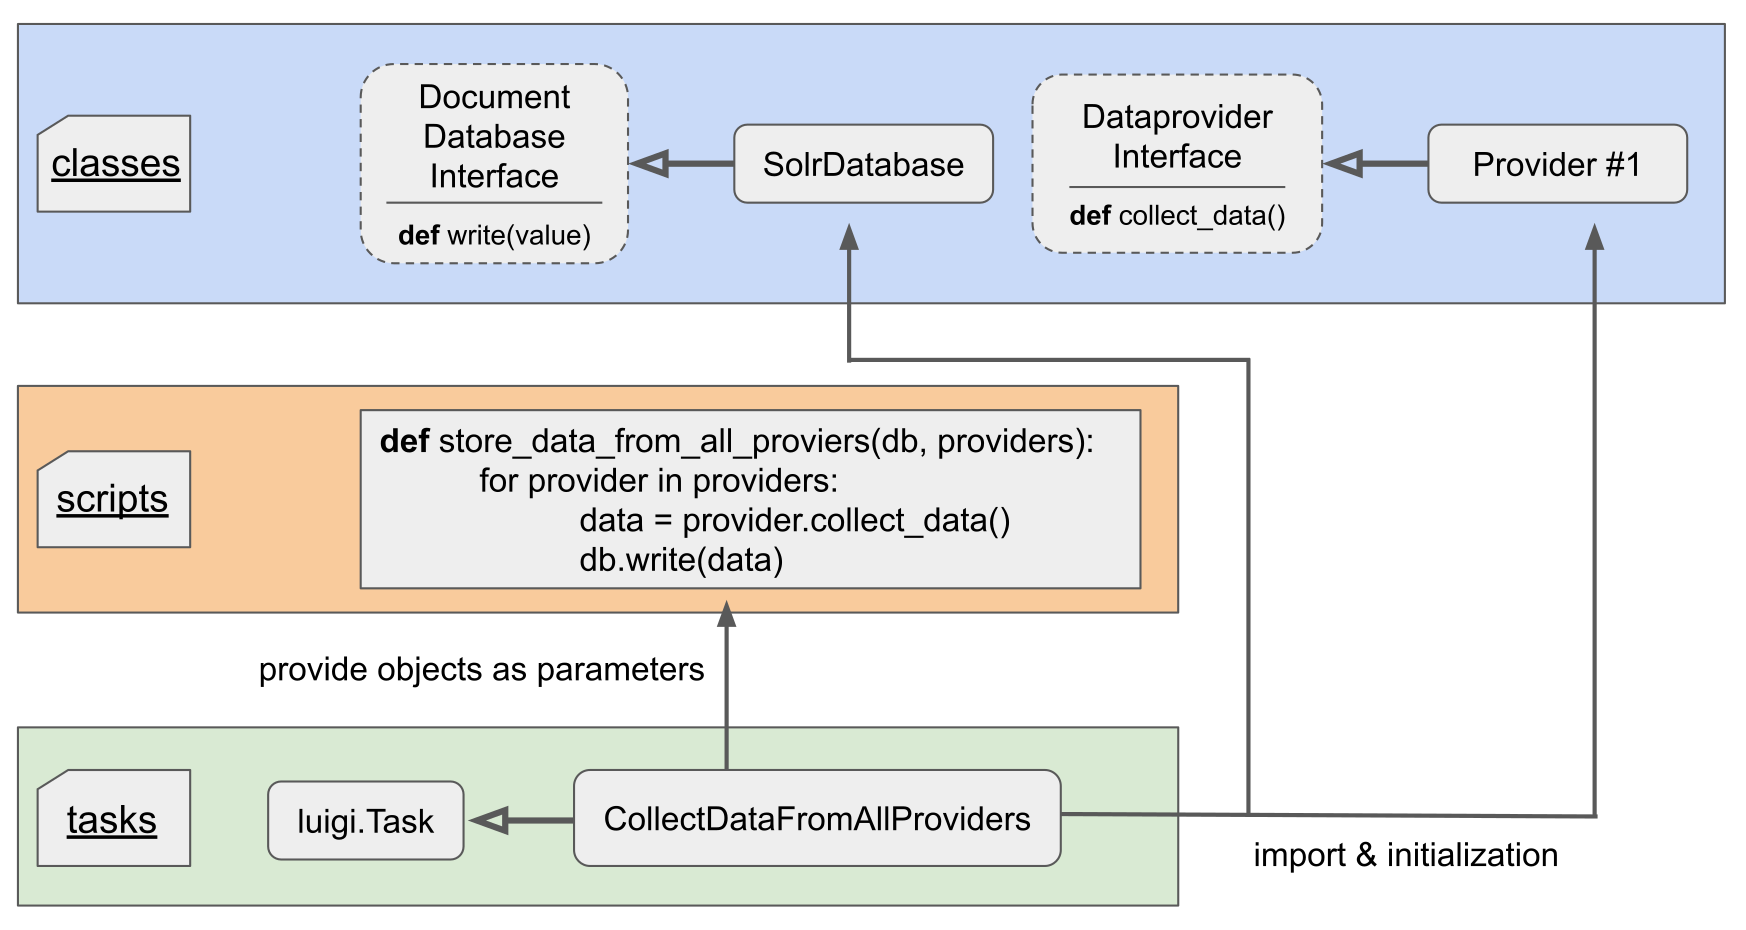 Three large fields entitled 'classes', 'scripts', and 'tasks' are shown. 'classes' holds a rounded box with dotted borders named 'Document Database Interface' with a label 'def write(value)'. Towards 'Document Database Interface' points an arrow from a box with solid borders saying 'SolrDatabase'. A second box with dotted borders in 'classes' is named 'DataproviderInterface' with a label 'def gather_data()'. An arrow points towards this box originating from a box with solid borders and named 'Provider #1'. The 'tasks' field holds a box saying 'class CollectDataFromAllProviders(luigi.Task)'. From this box two arrows split pointing at 'SolrDatabase' and 'Provider #1', respectively. The arrows are labeled 'import & initialization'. Another arrow labeled 'provide objects as parameters' points towards a box in the 'scripts' field. The box shows a small program snippet in Python that takes a list of providers and a database object. The program then iterates the provider list, calling the `gather_data()` method of the provider and hands the resulting data to the `write(data)` method of the database object.